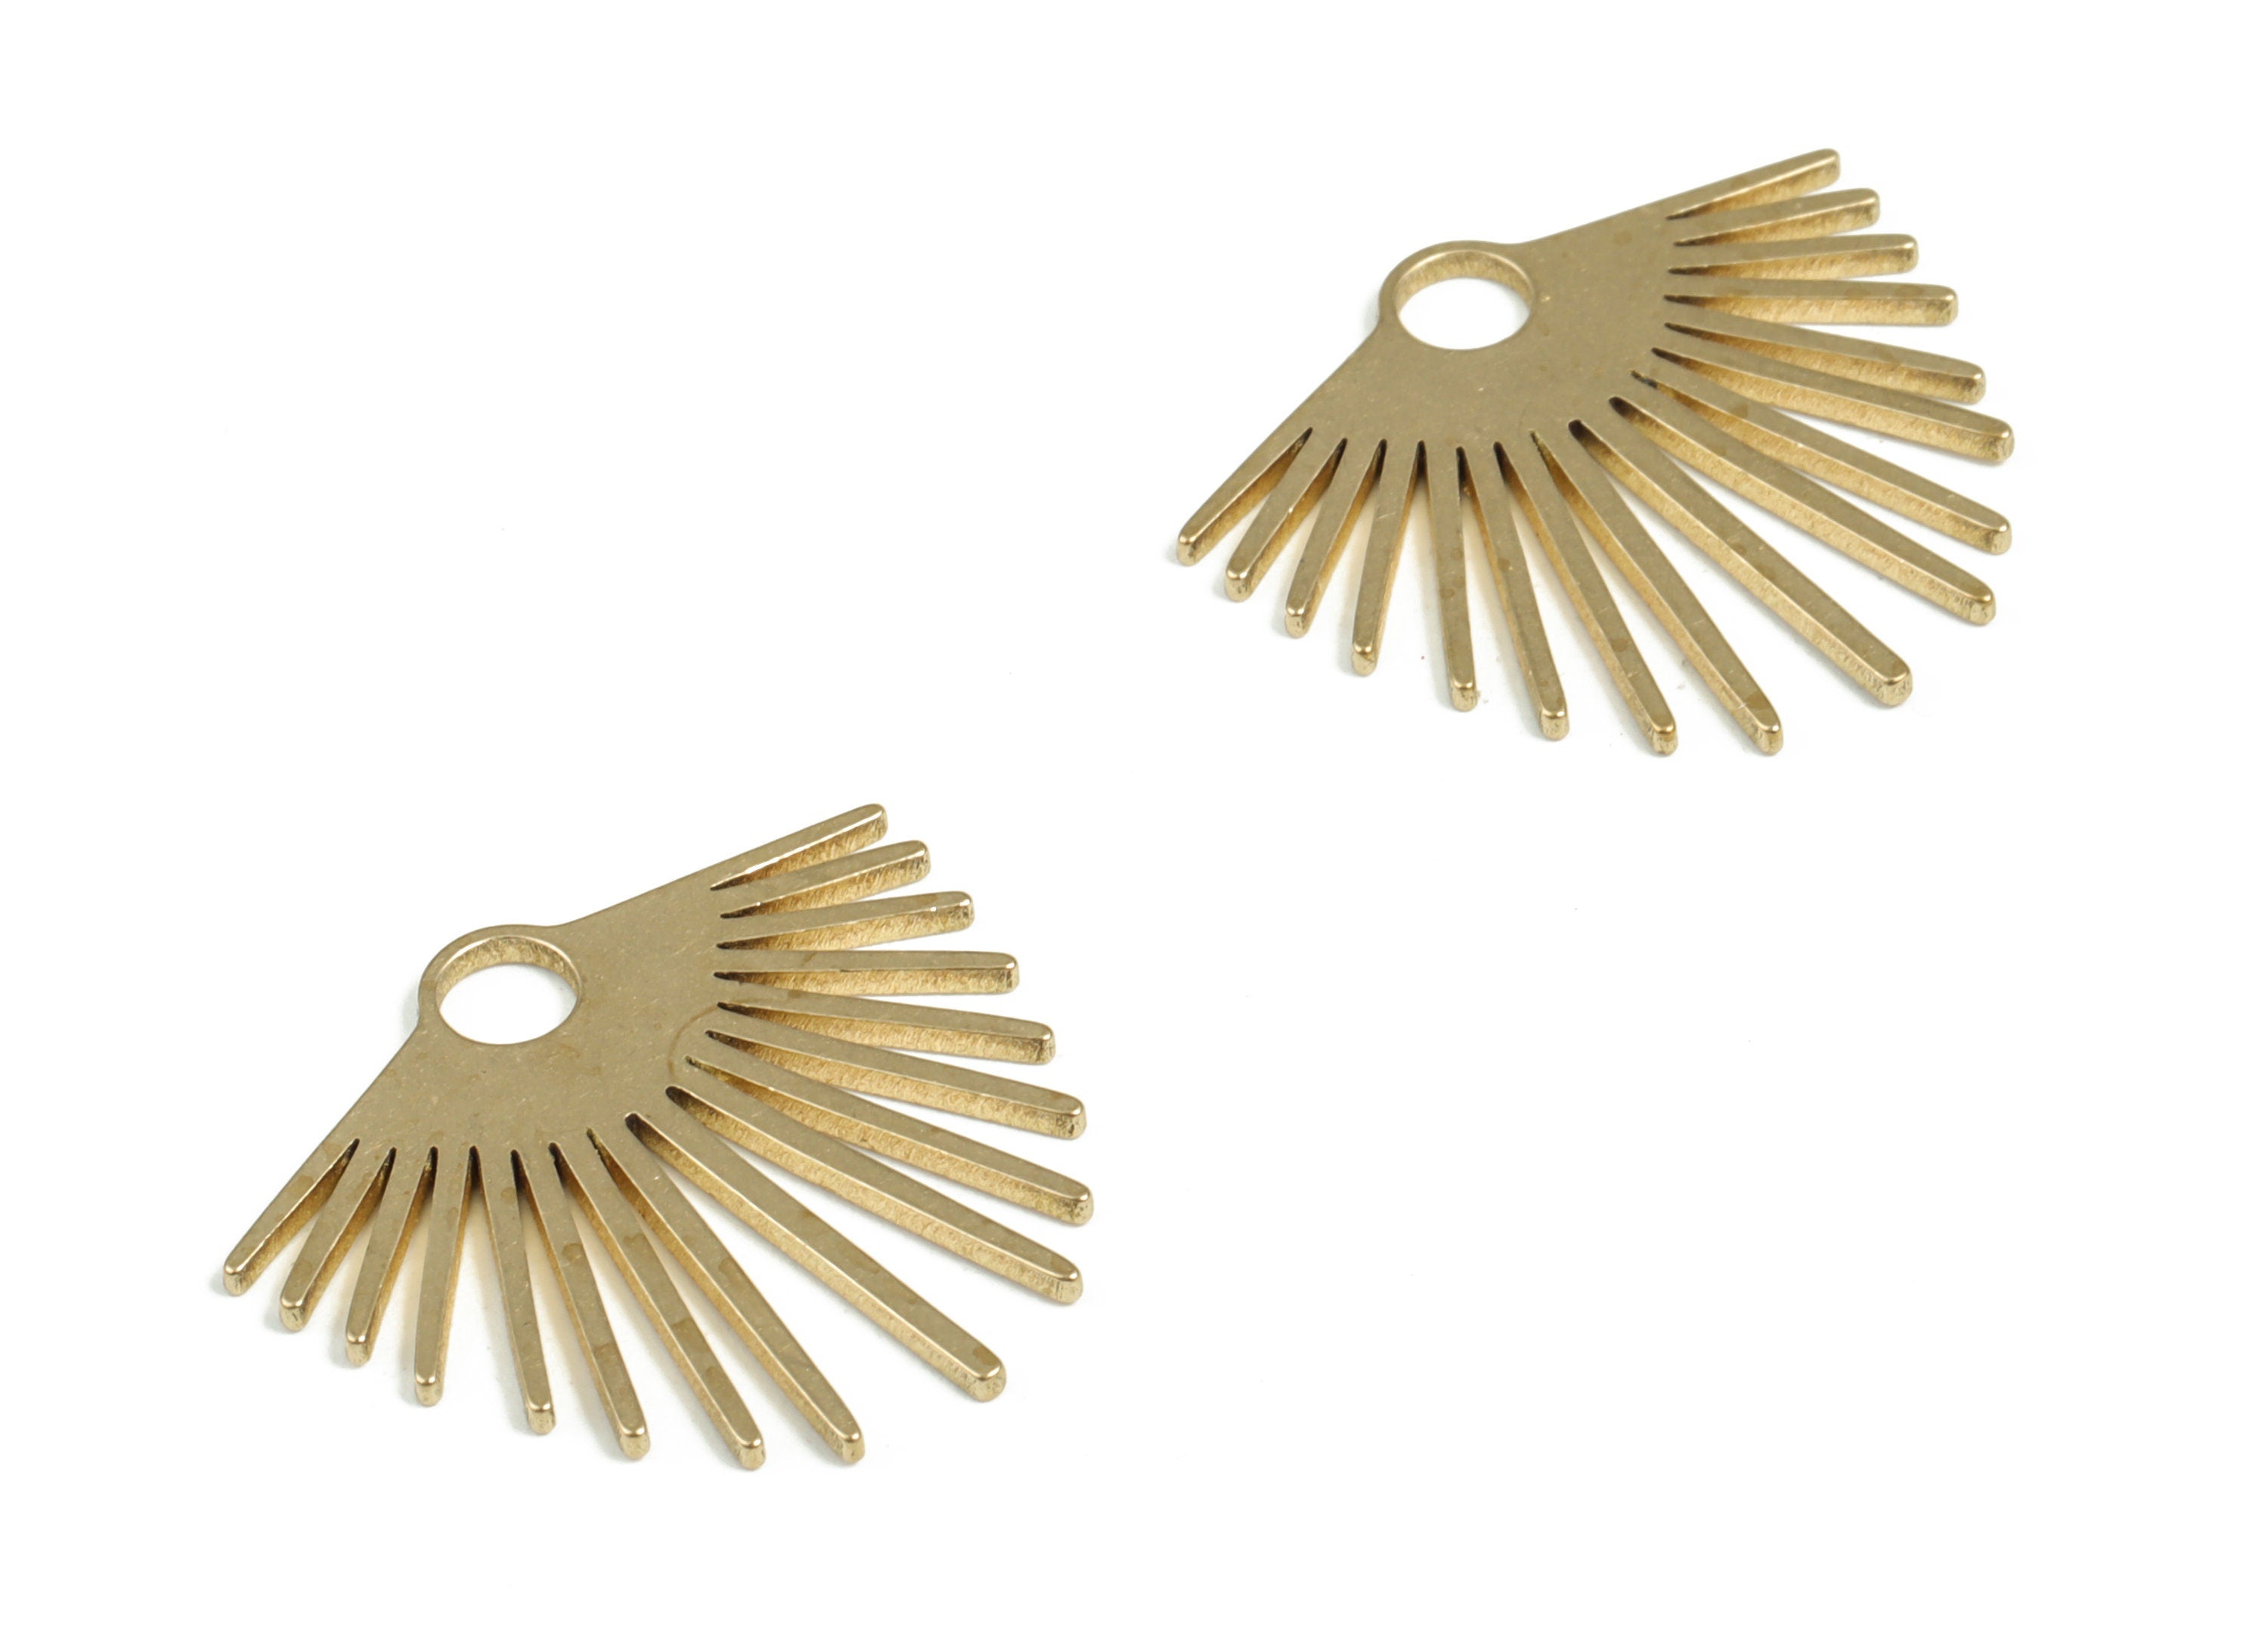 Accessorize in Style with Brass Earring Findings - Raw Brass Connectors and  Charms. 3106